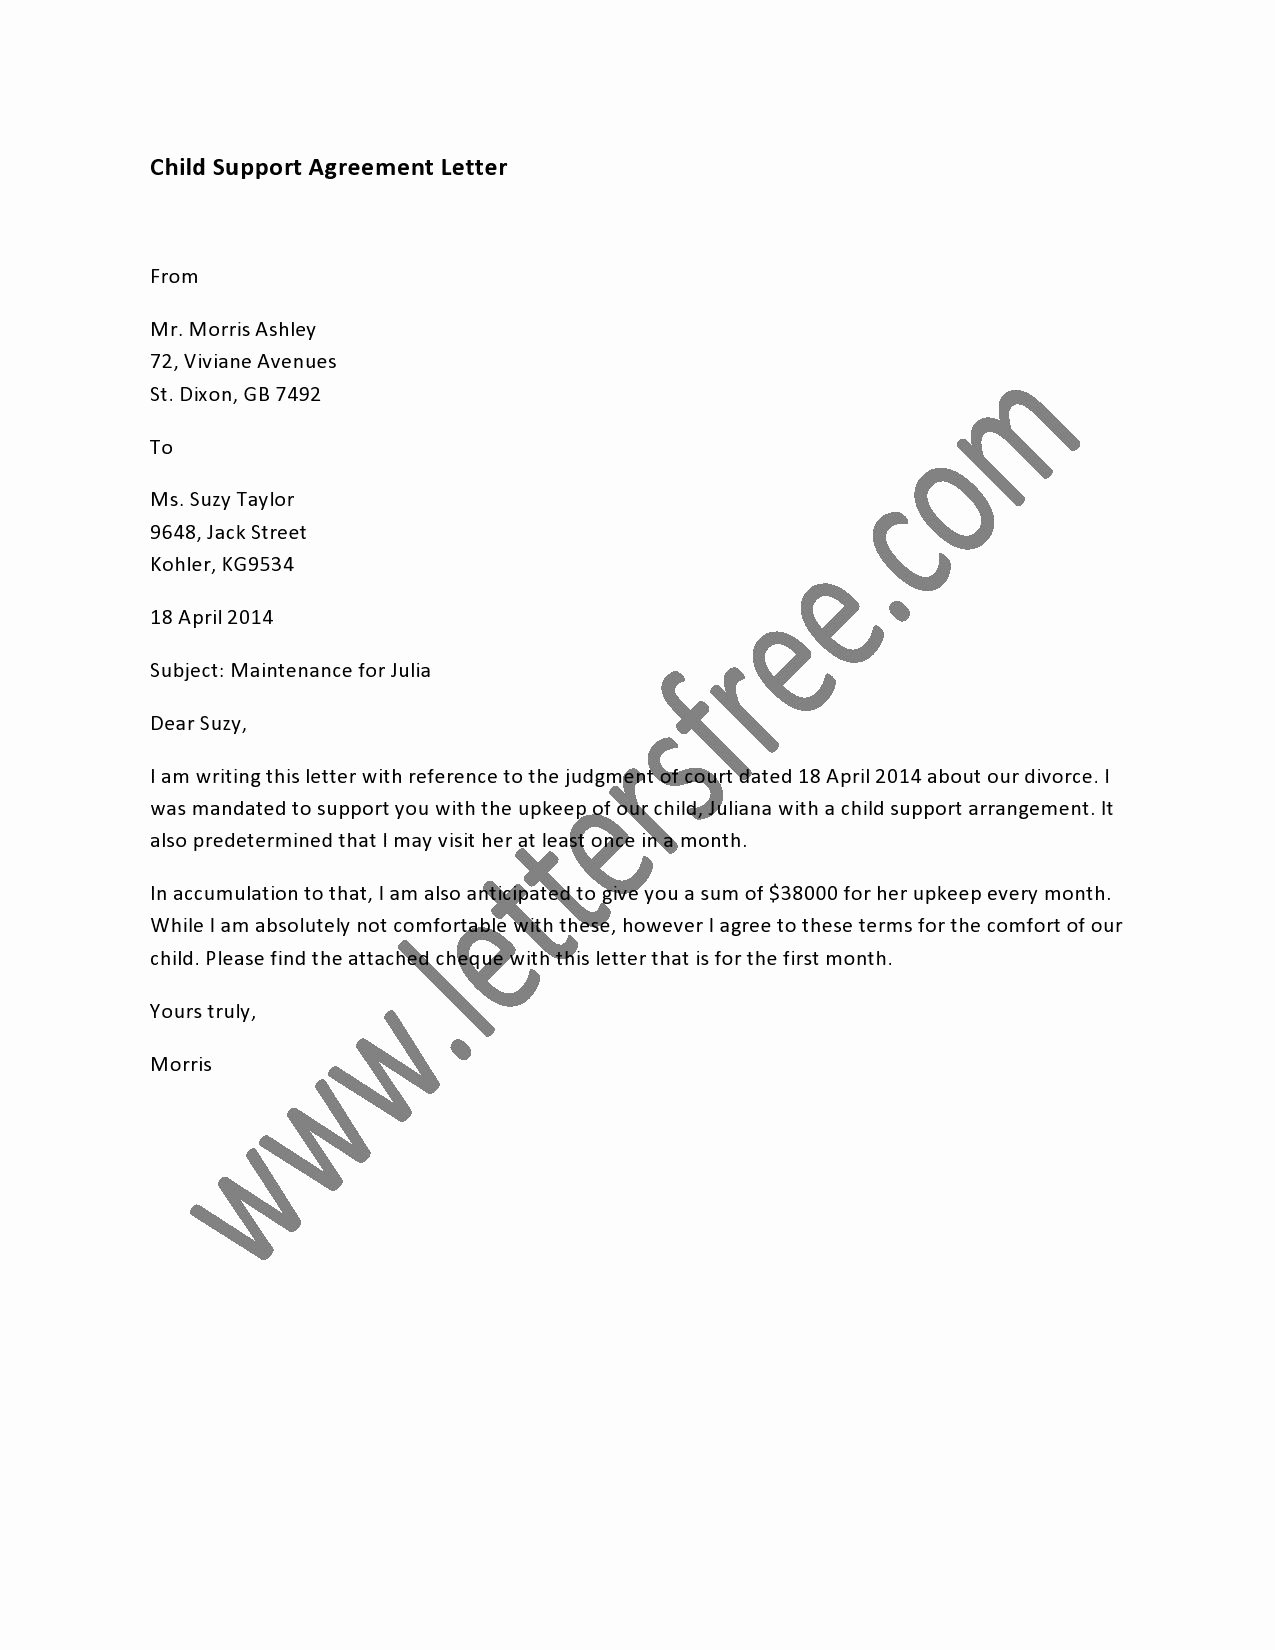 Private Child Support Agreement Template Inspirational Child Support Agreement Letter